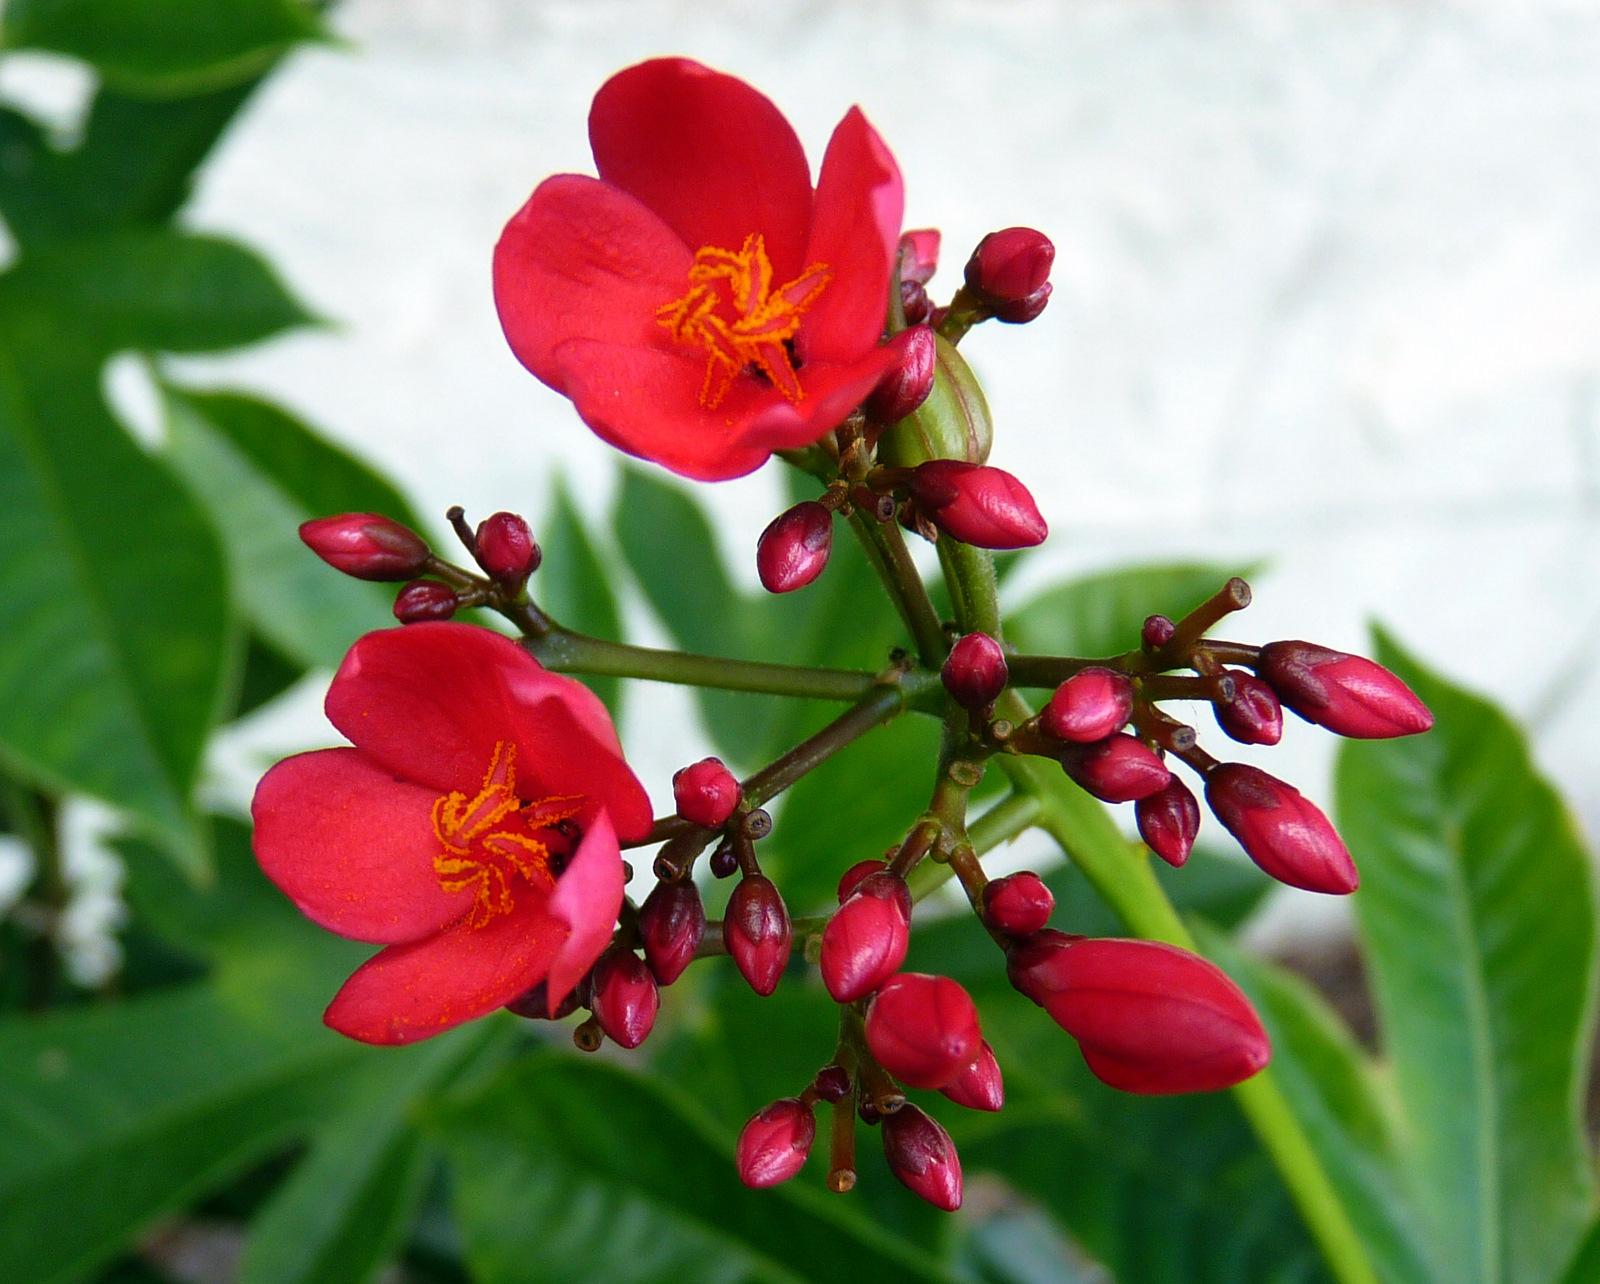 My Florida Backyard: Flowers are Red